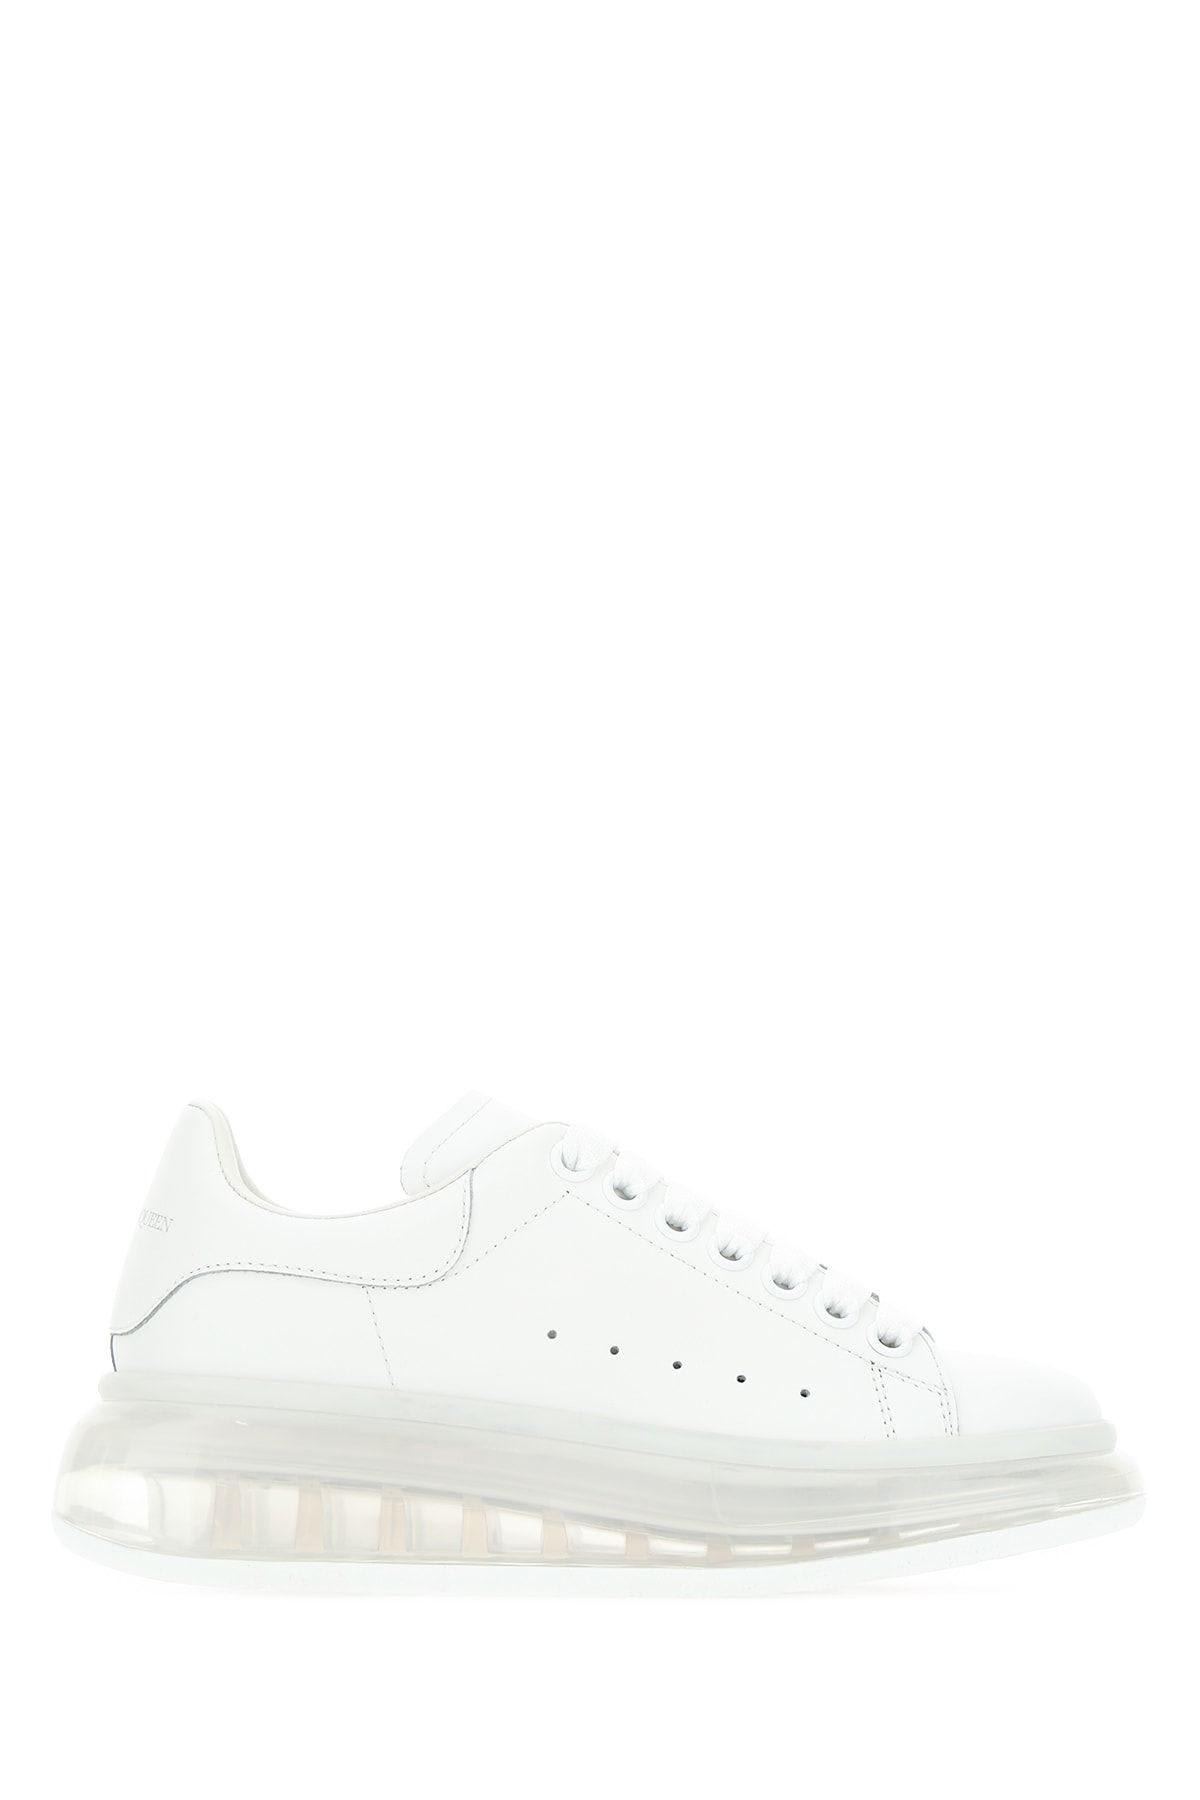 Alexander Mcqueen White Leather Sneakers